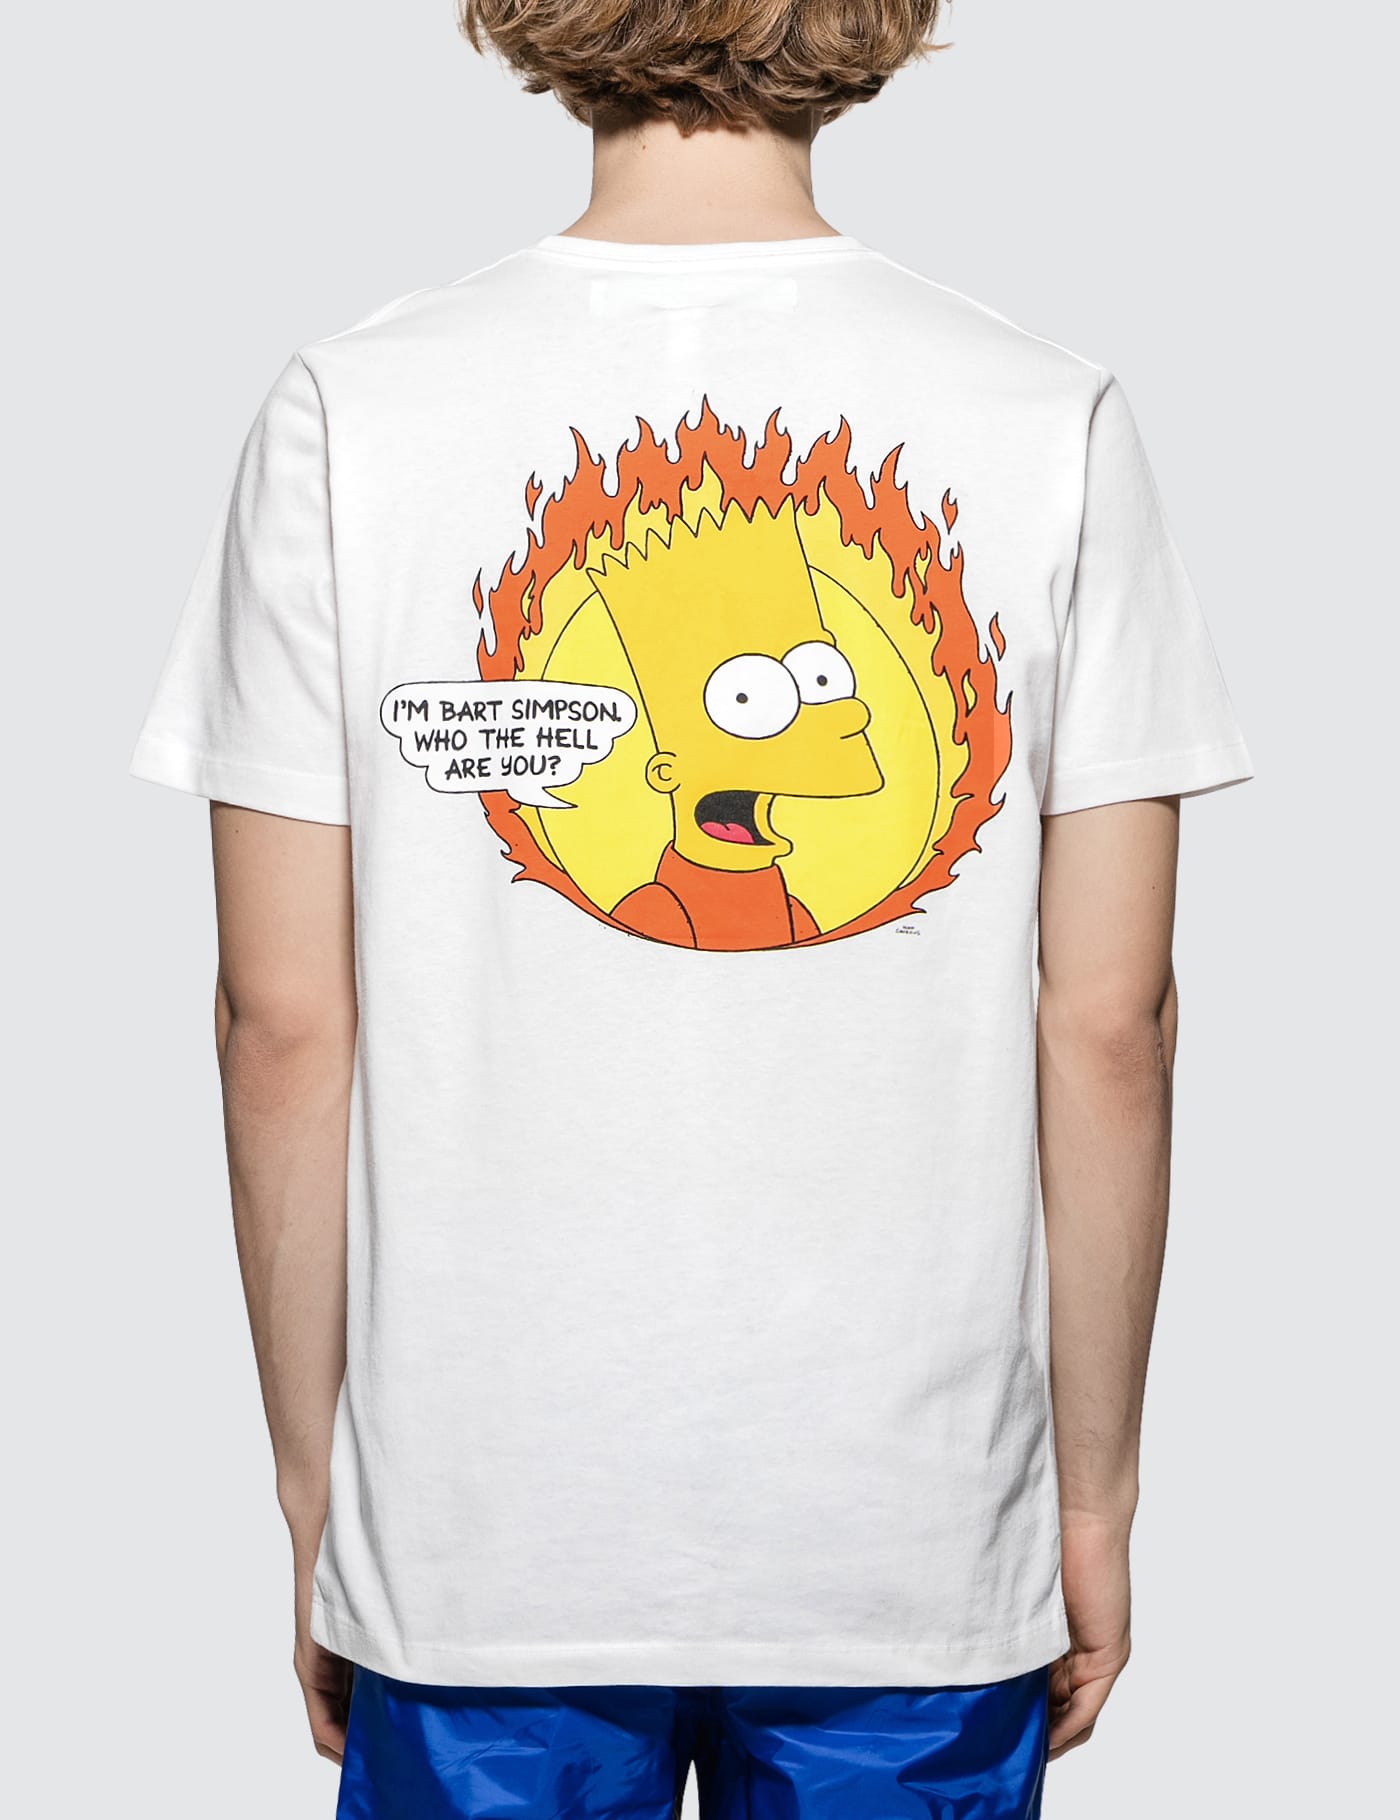 Off White T Shirt Bart Simpson Top Sellers, 60% OFF | www.hcb.cat